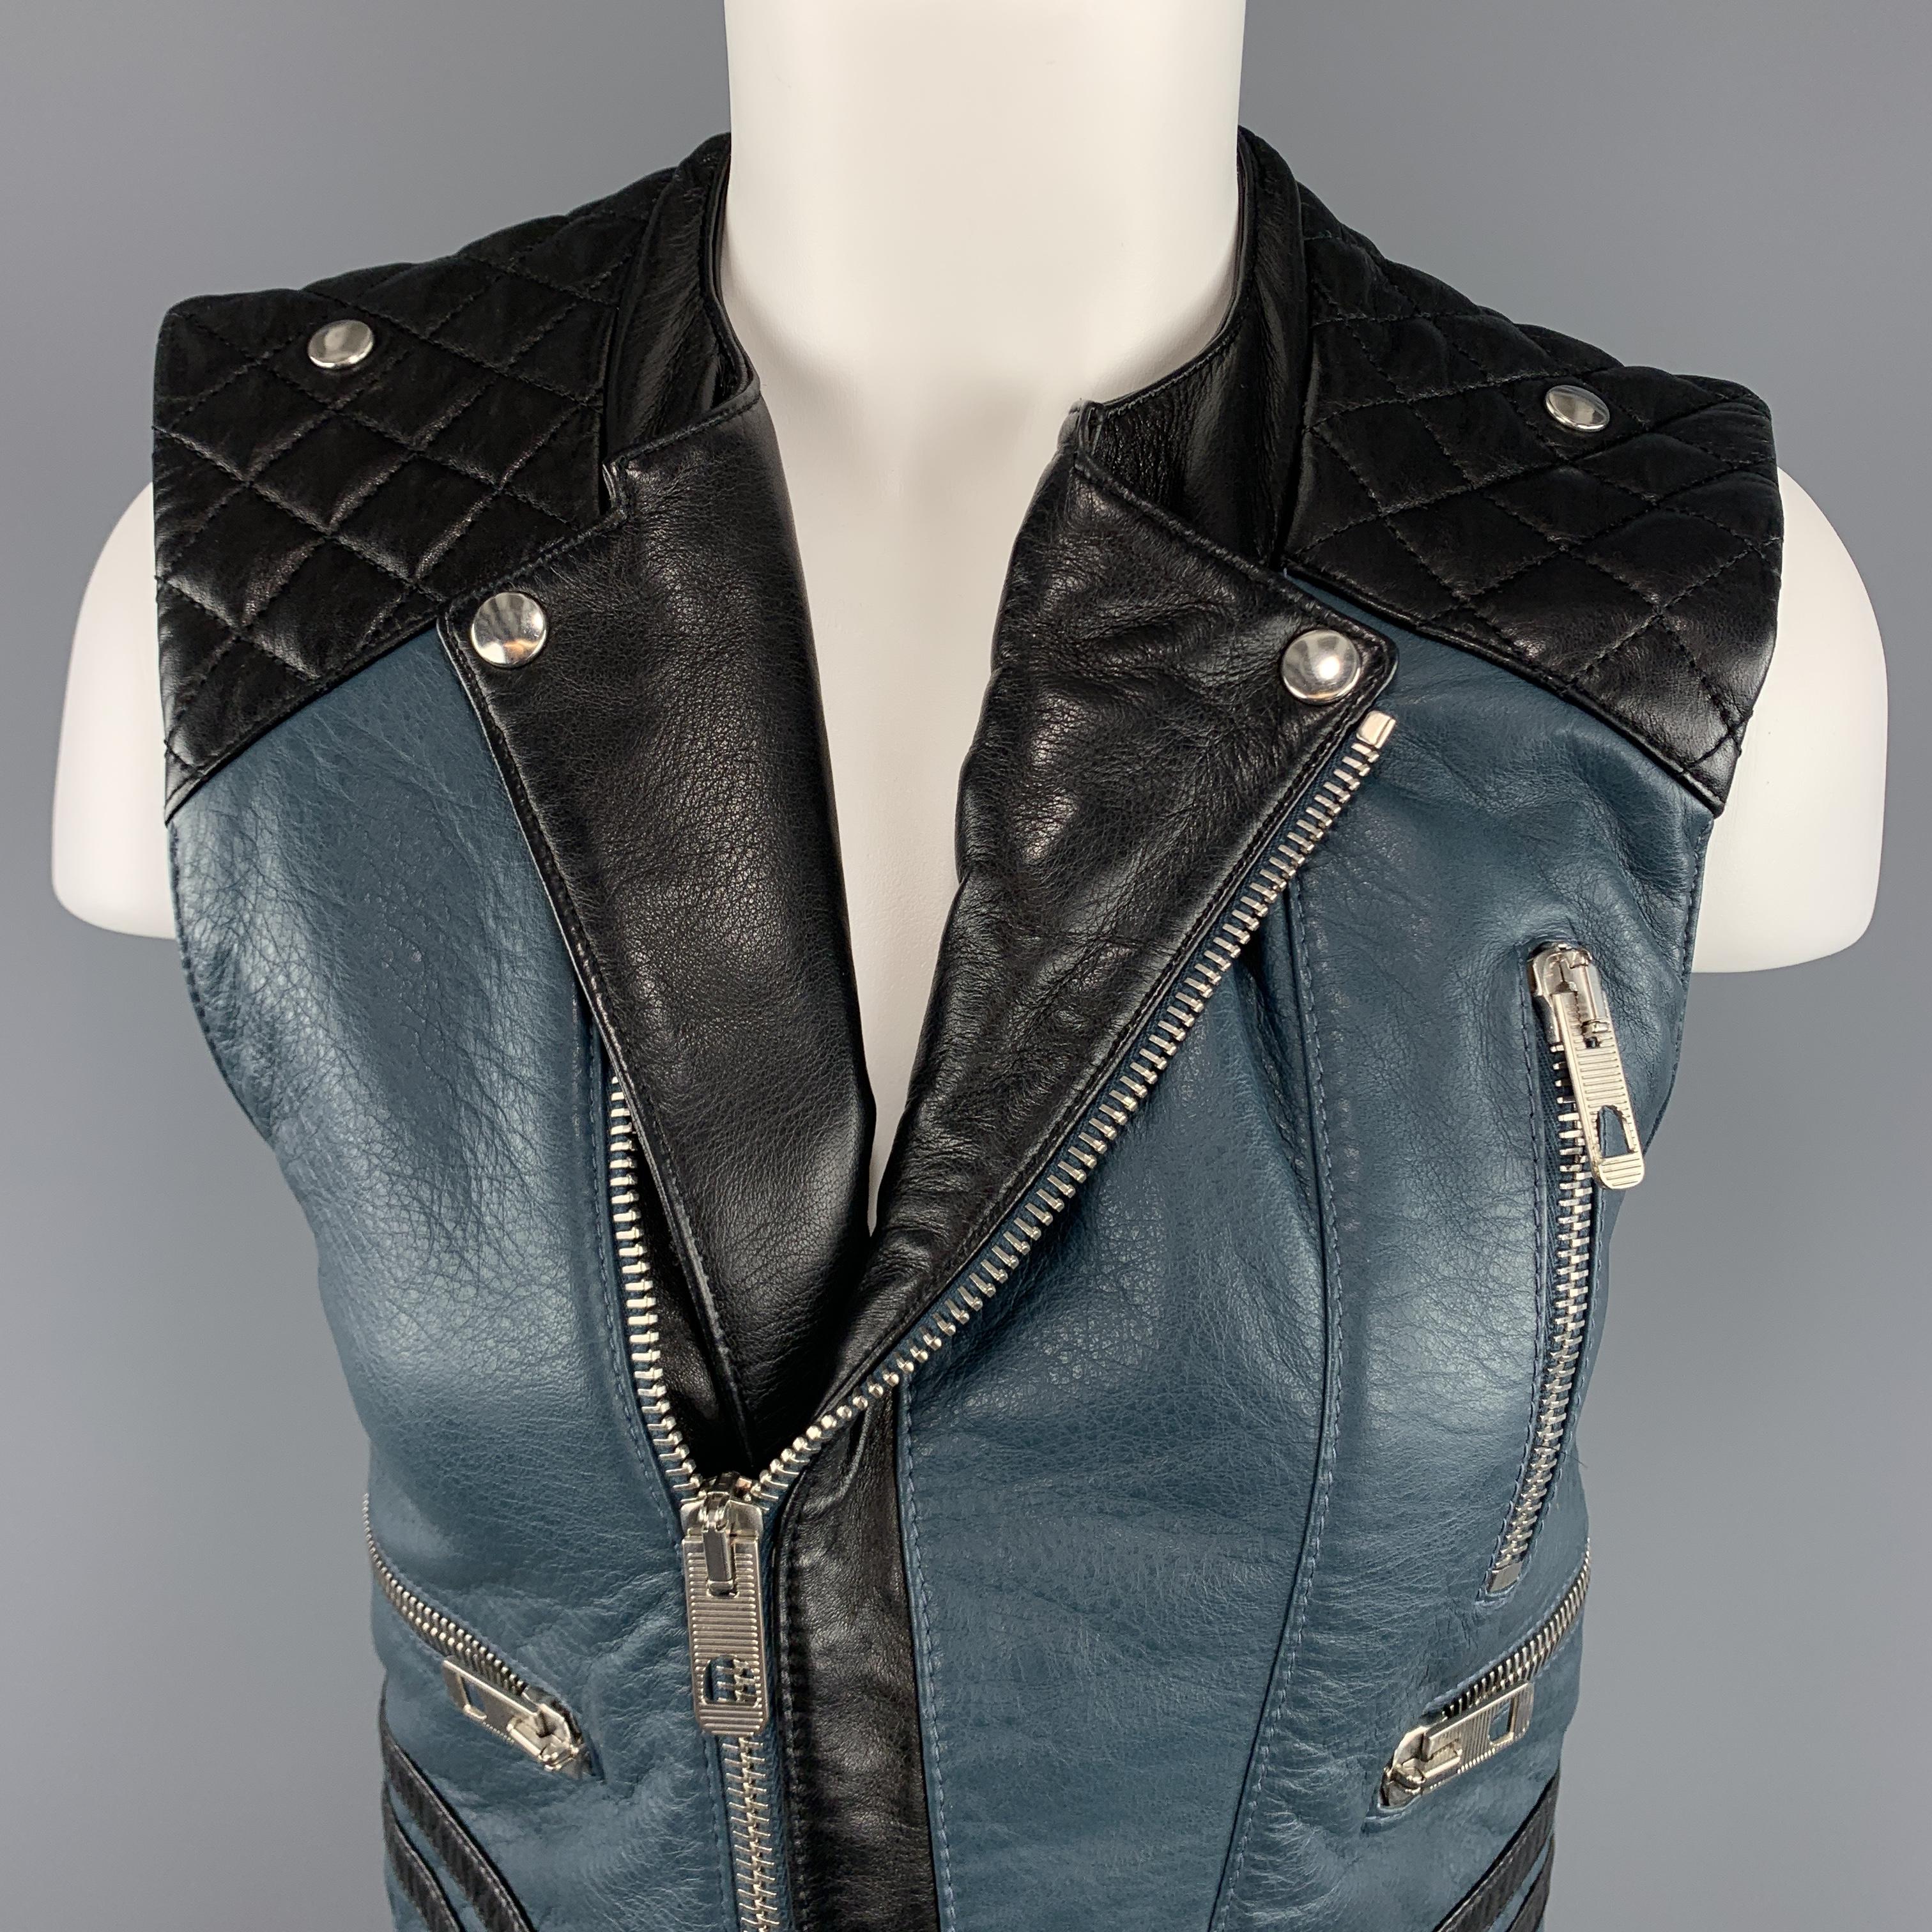 BALENCIAGA.LEATHER biker style moto vest by NICOLAS GHESQUIERE  comes in teal blue textured leather three silver tone zip pockets, asymmetrical zip front, round collarless neckline with pointed lapel, black quilted leather shoulders, and black